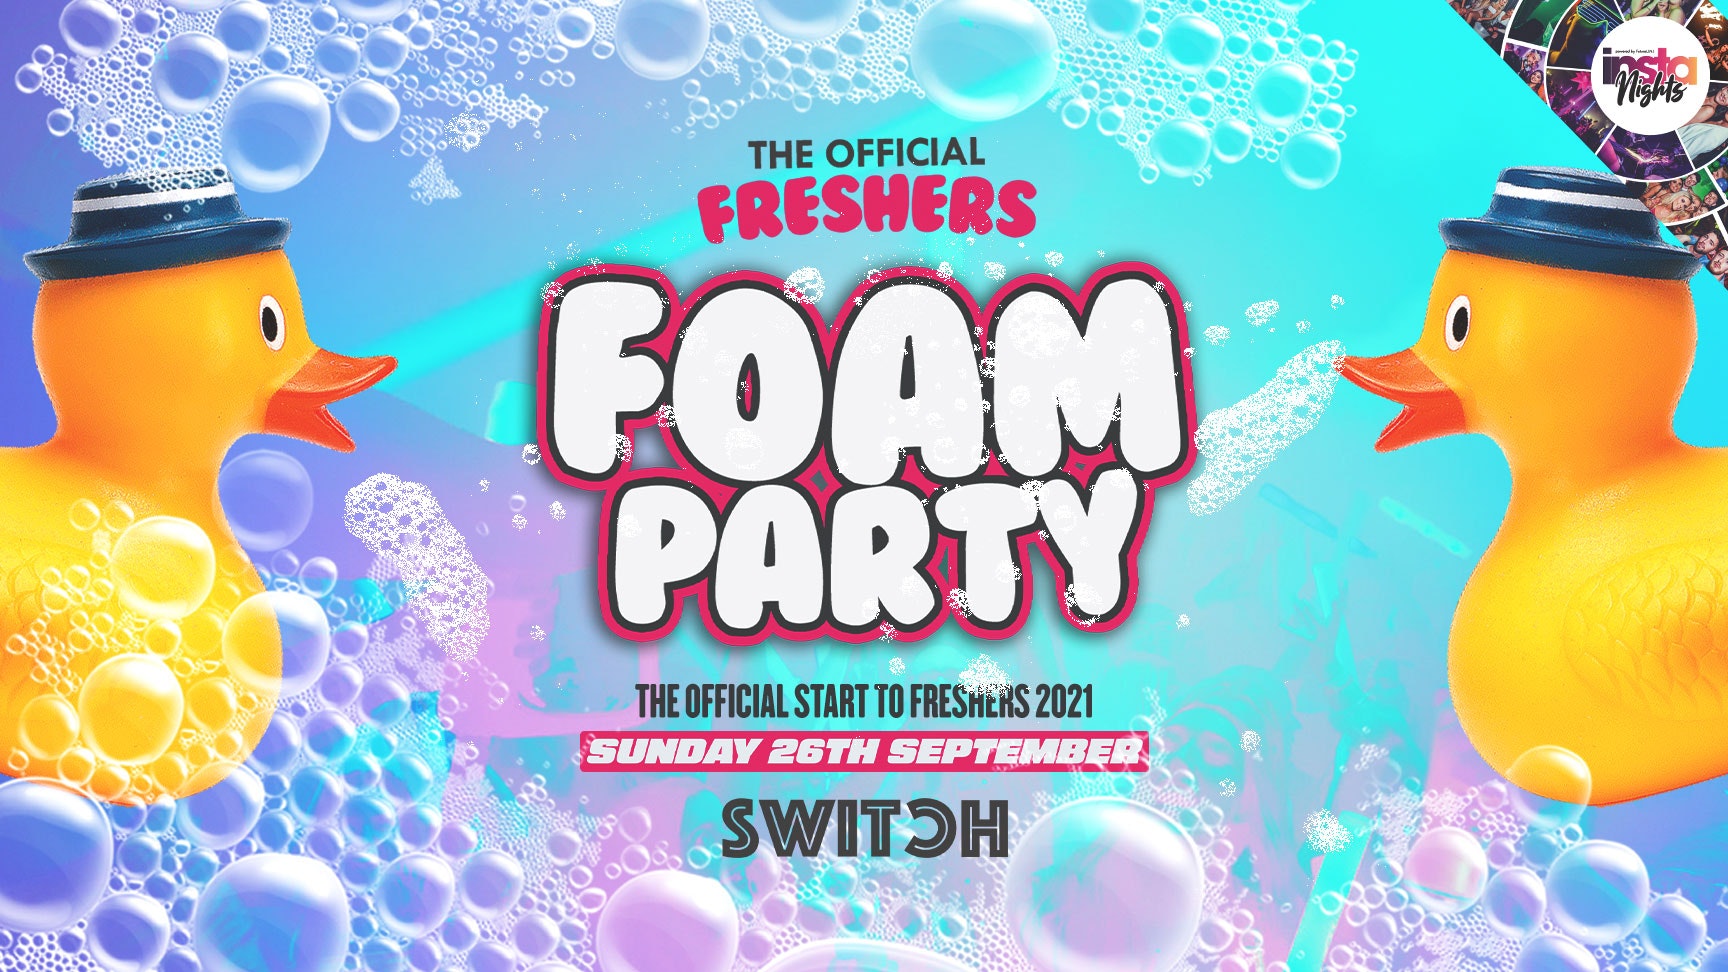 The Official Freshers Foam Party 2021 – Preston Freshers